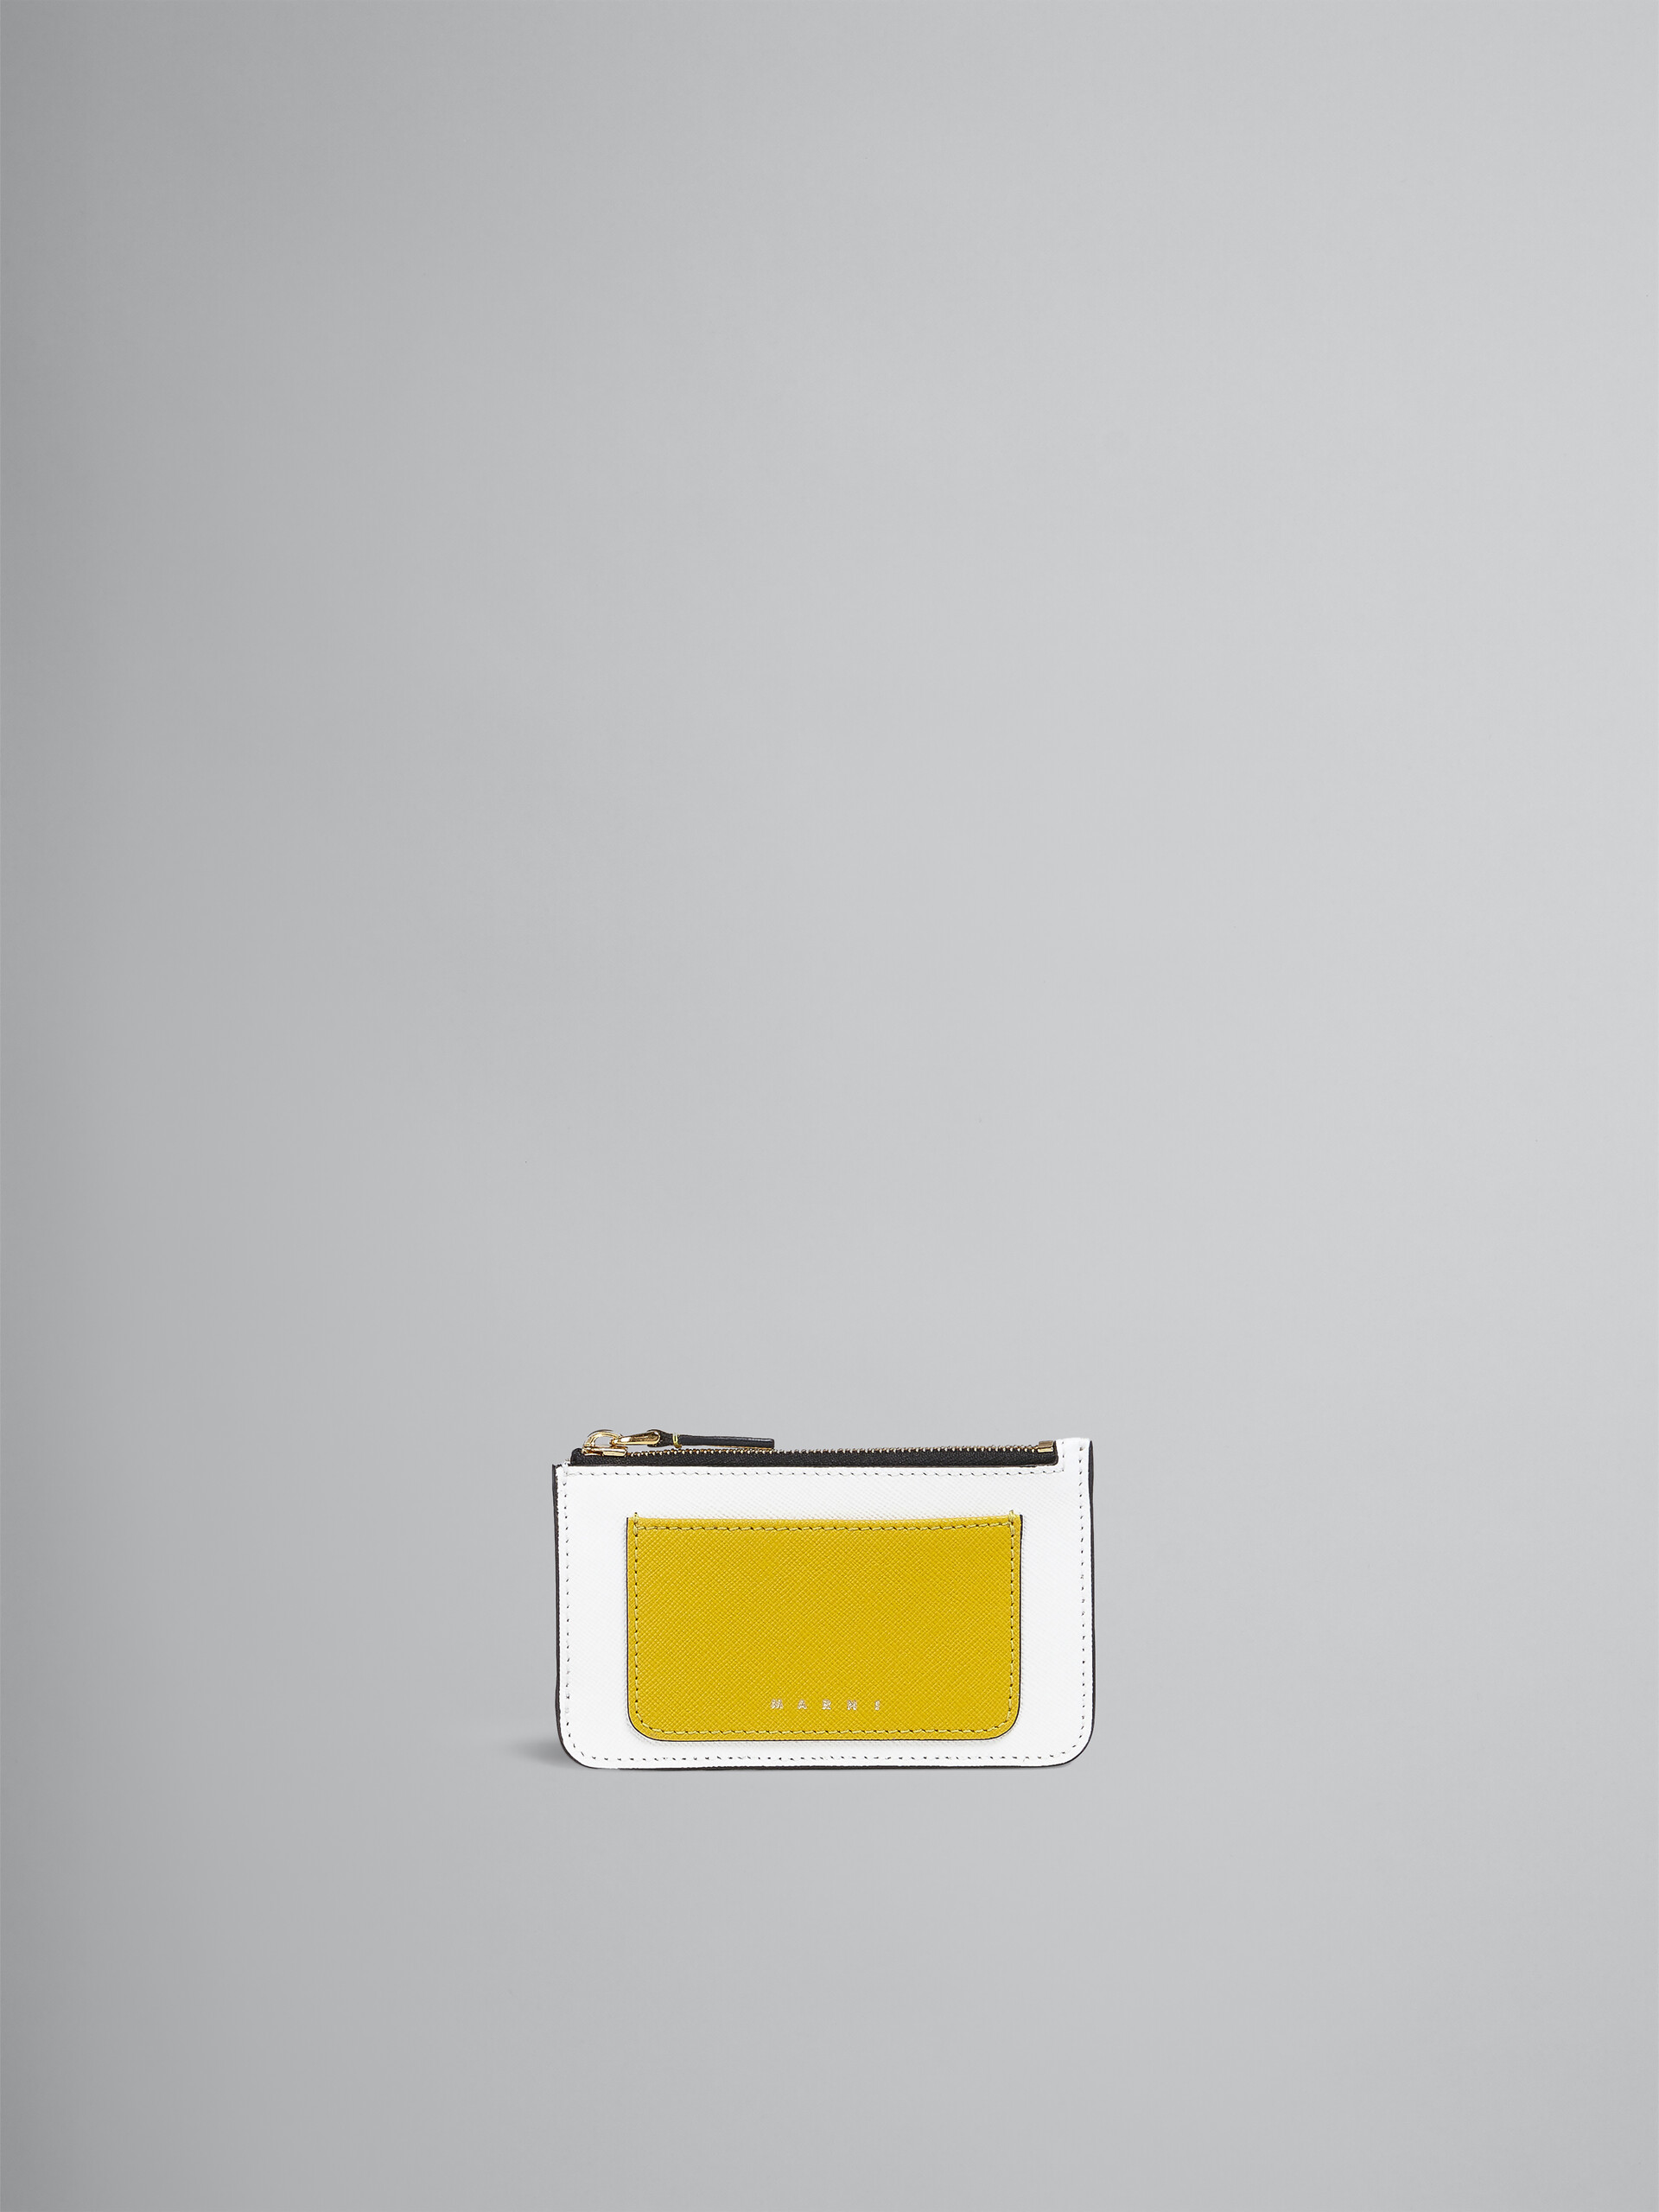 Tone on tone yellow white Saffiano leather card case - Wallets - Image 1